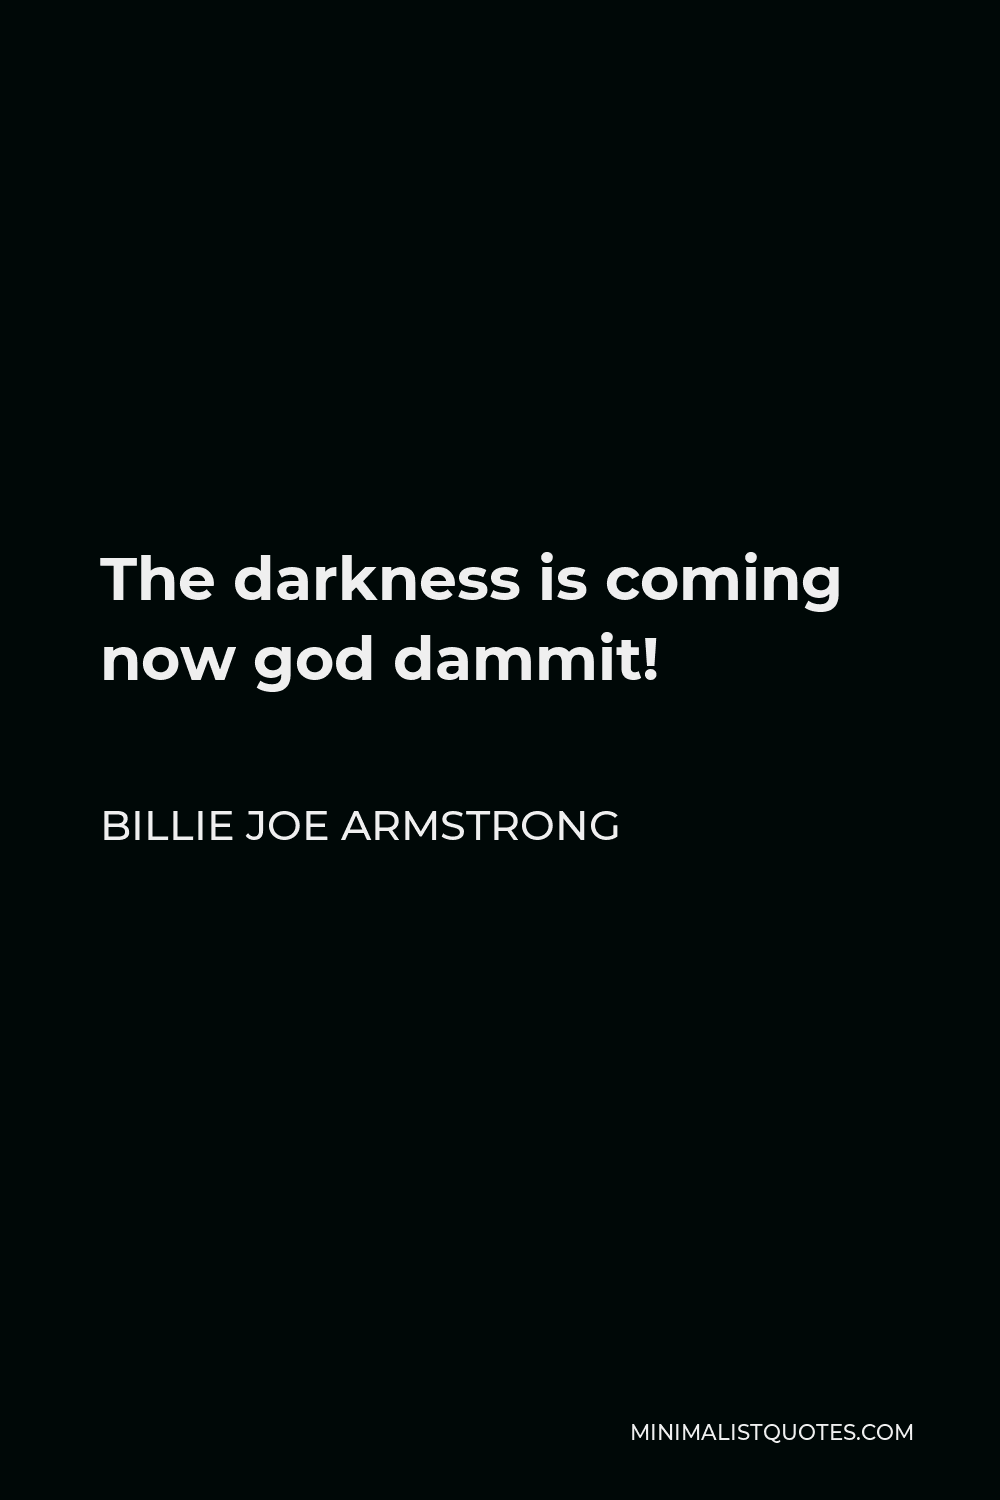 Billie Joe Armstrong Quote - The darkness is coming now god dammit!